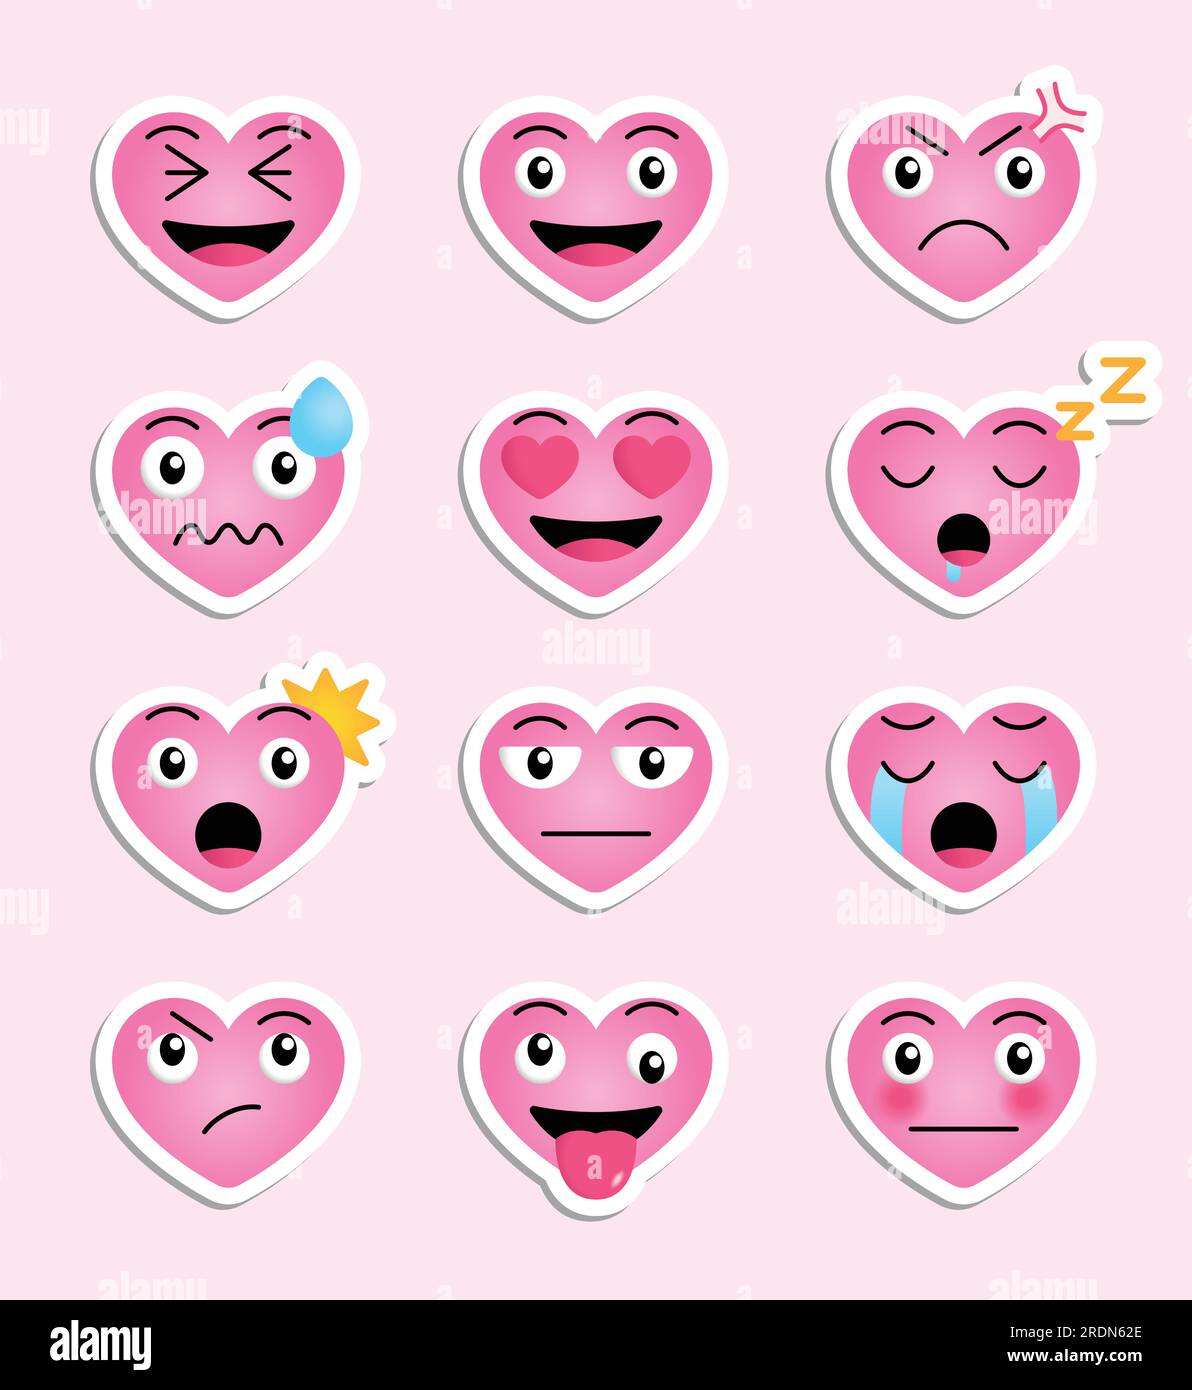 Cute heart feeling expression stickers. Set of cute heart vector stickers representing various feelings for design elements or emoticons and emojis. Stock Vector